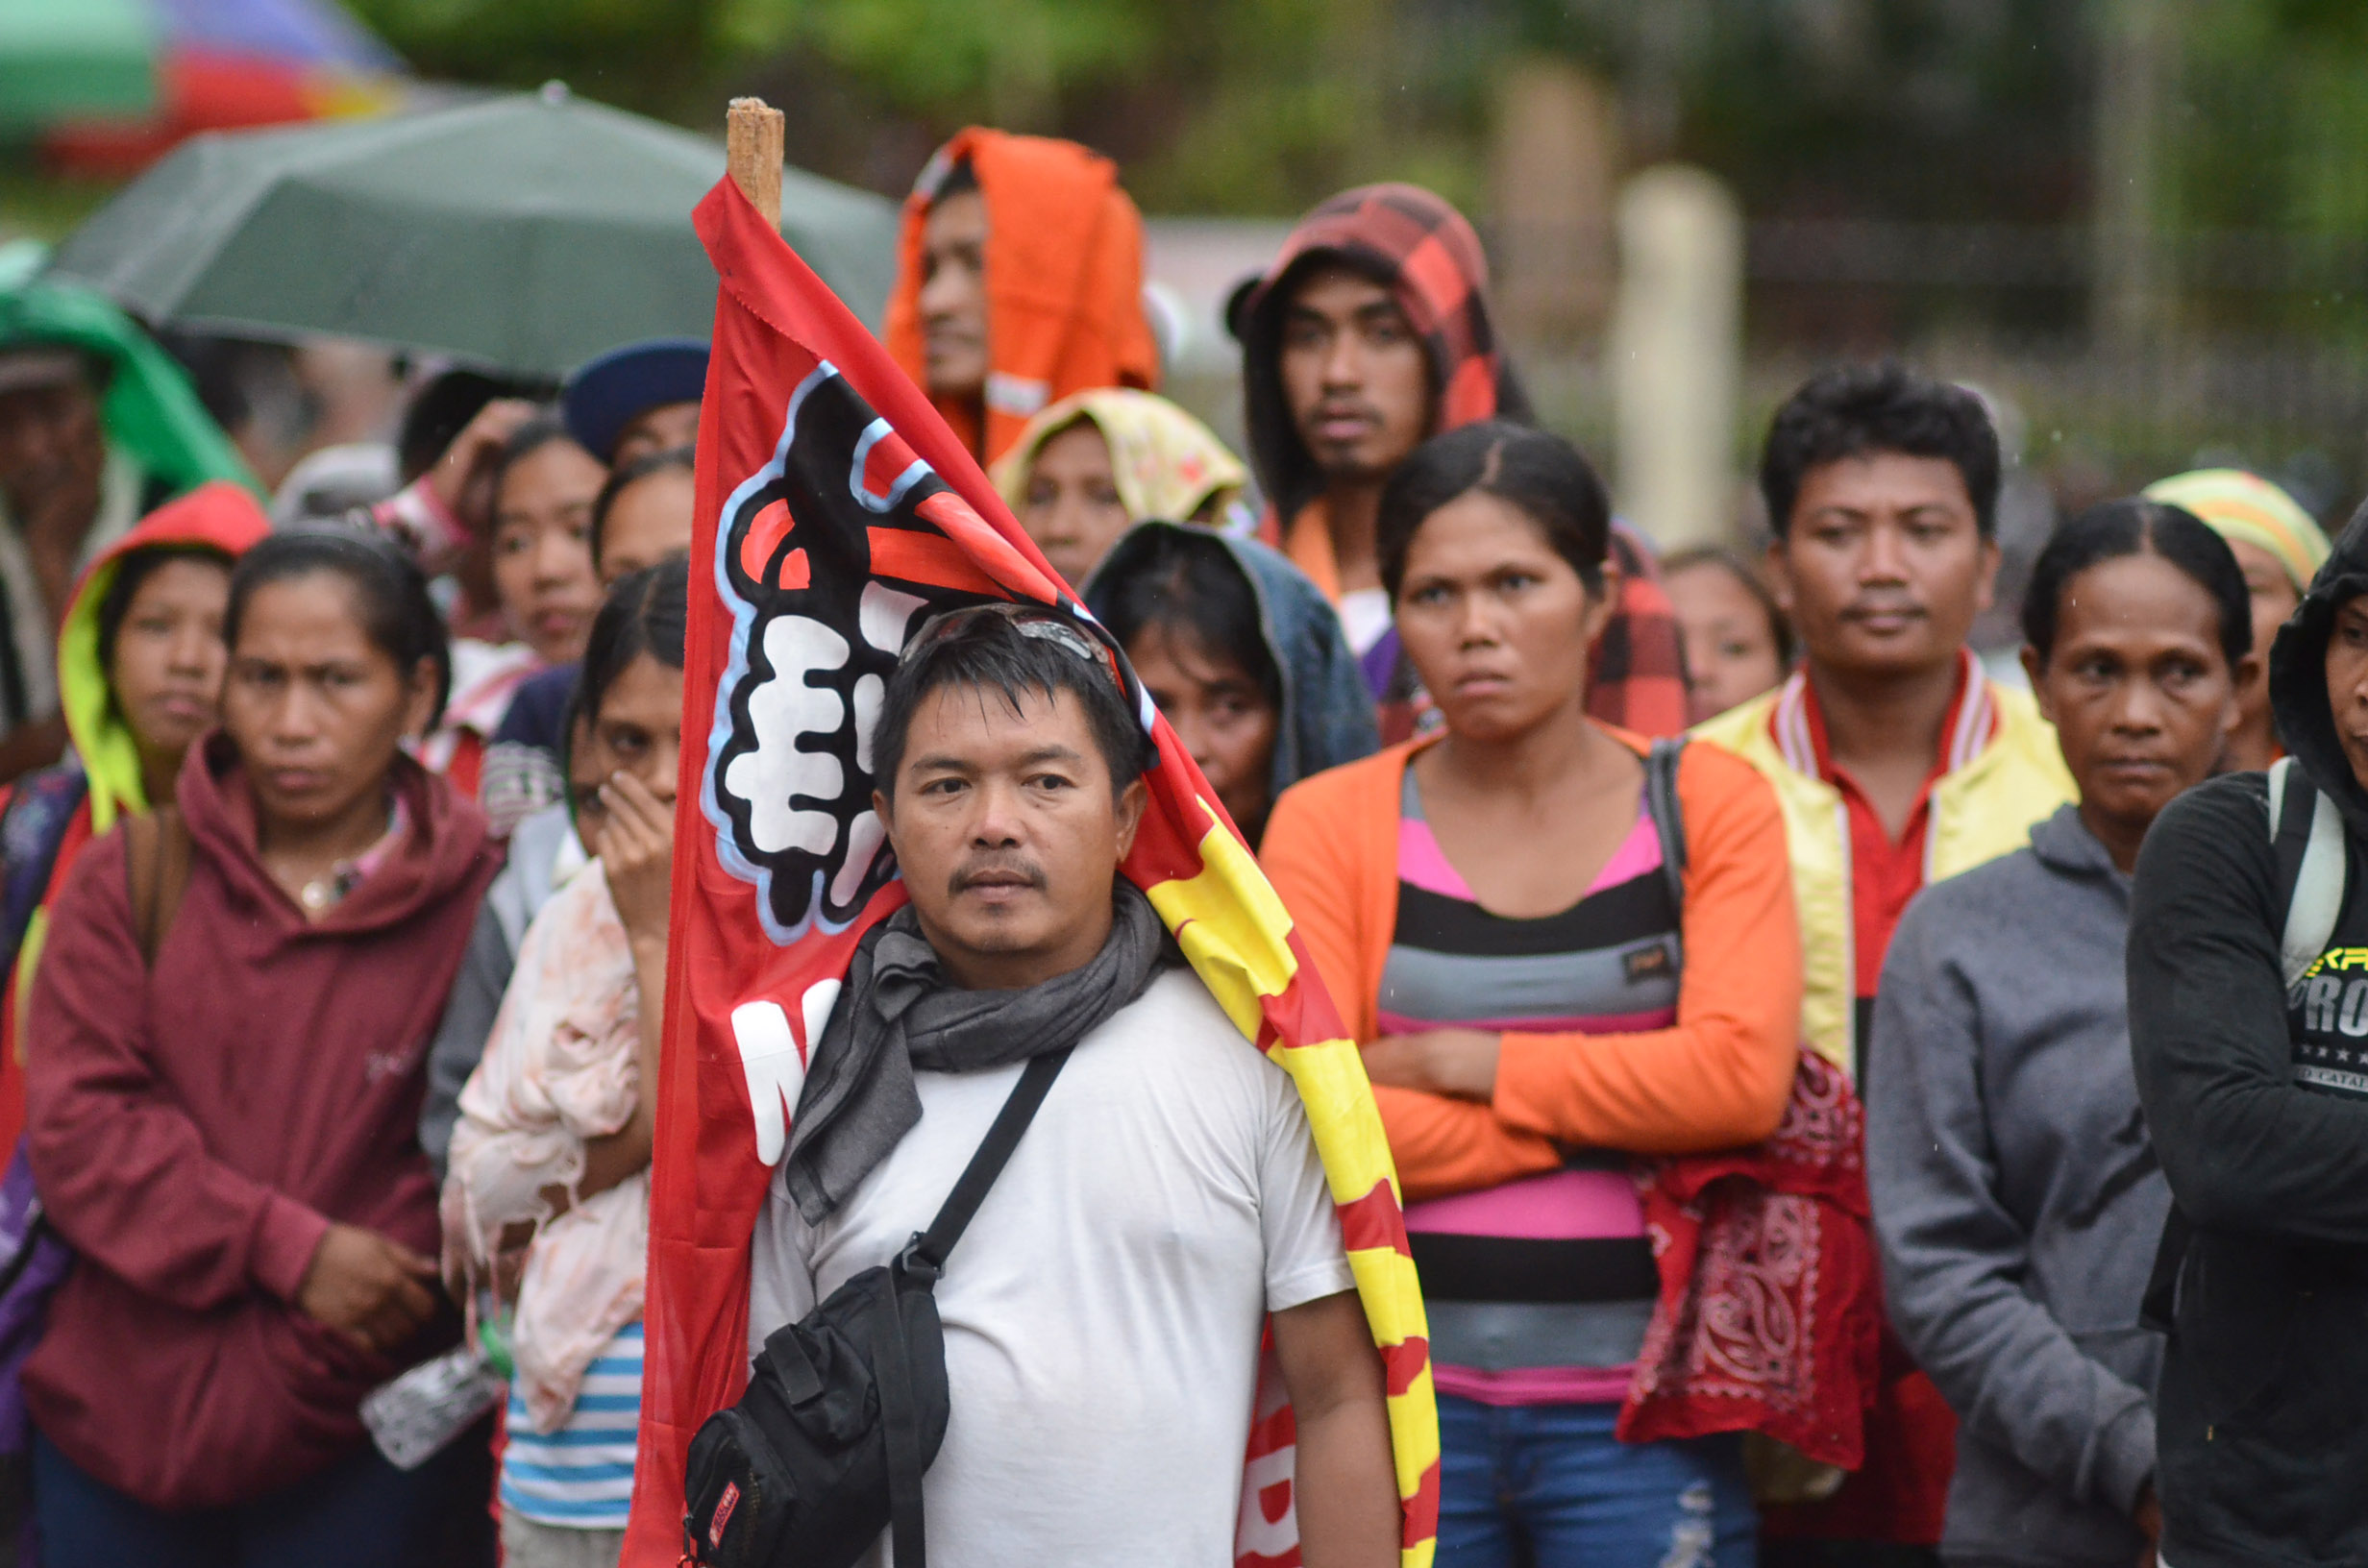 Farmers brave the rain to attend the rally held at Rizal Park, Davao City and to witness in a large screen the first State of the Nation Address of the President. (Medel V. Hernani/davaotoday.com)